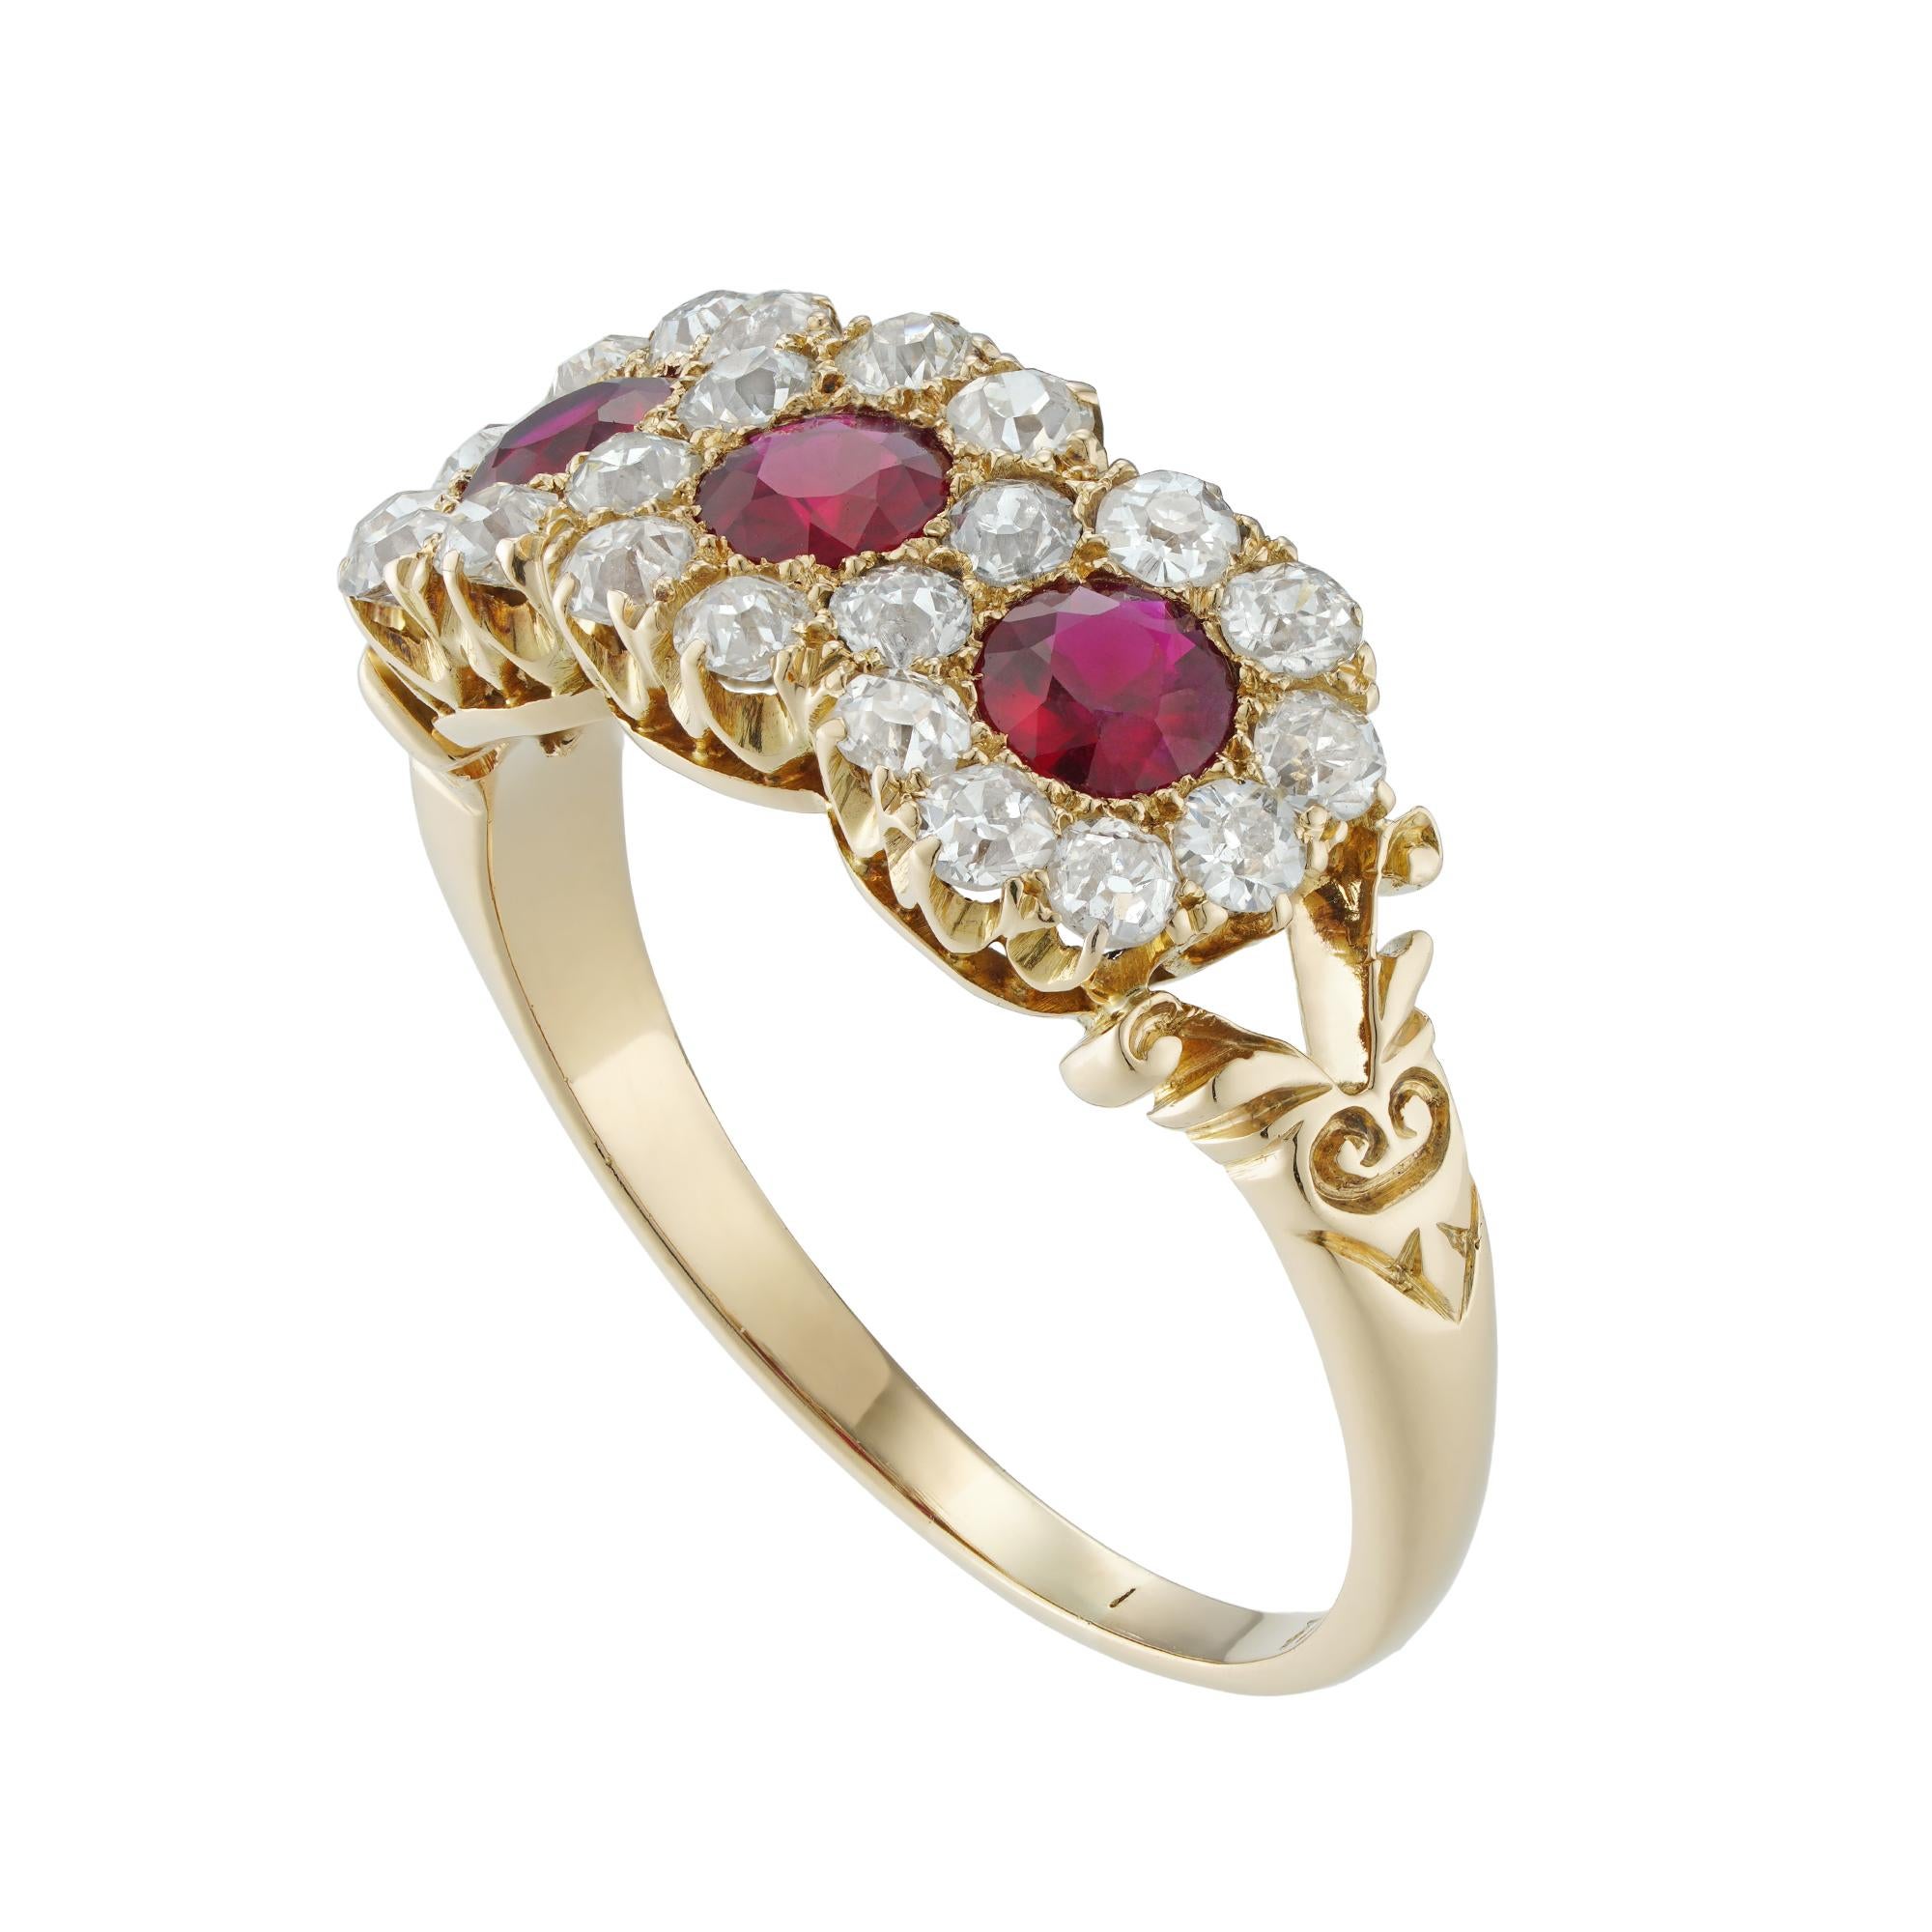 A Victorian ruby and diamond triple cluster ring, the three rubies weighing 0.63 carats in total, surrounded by interlocking clusters set with twenty-four old-cut diamonds estimated to weigh 0.75 carats, all claw-set to an 18ct yellow gold mount,